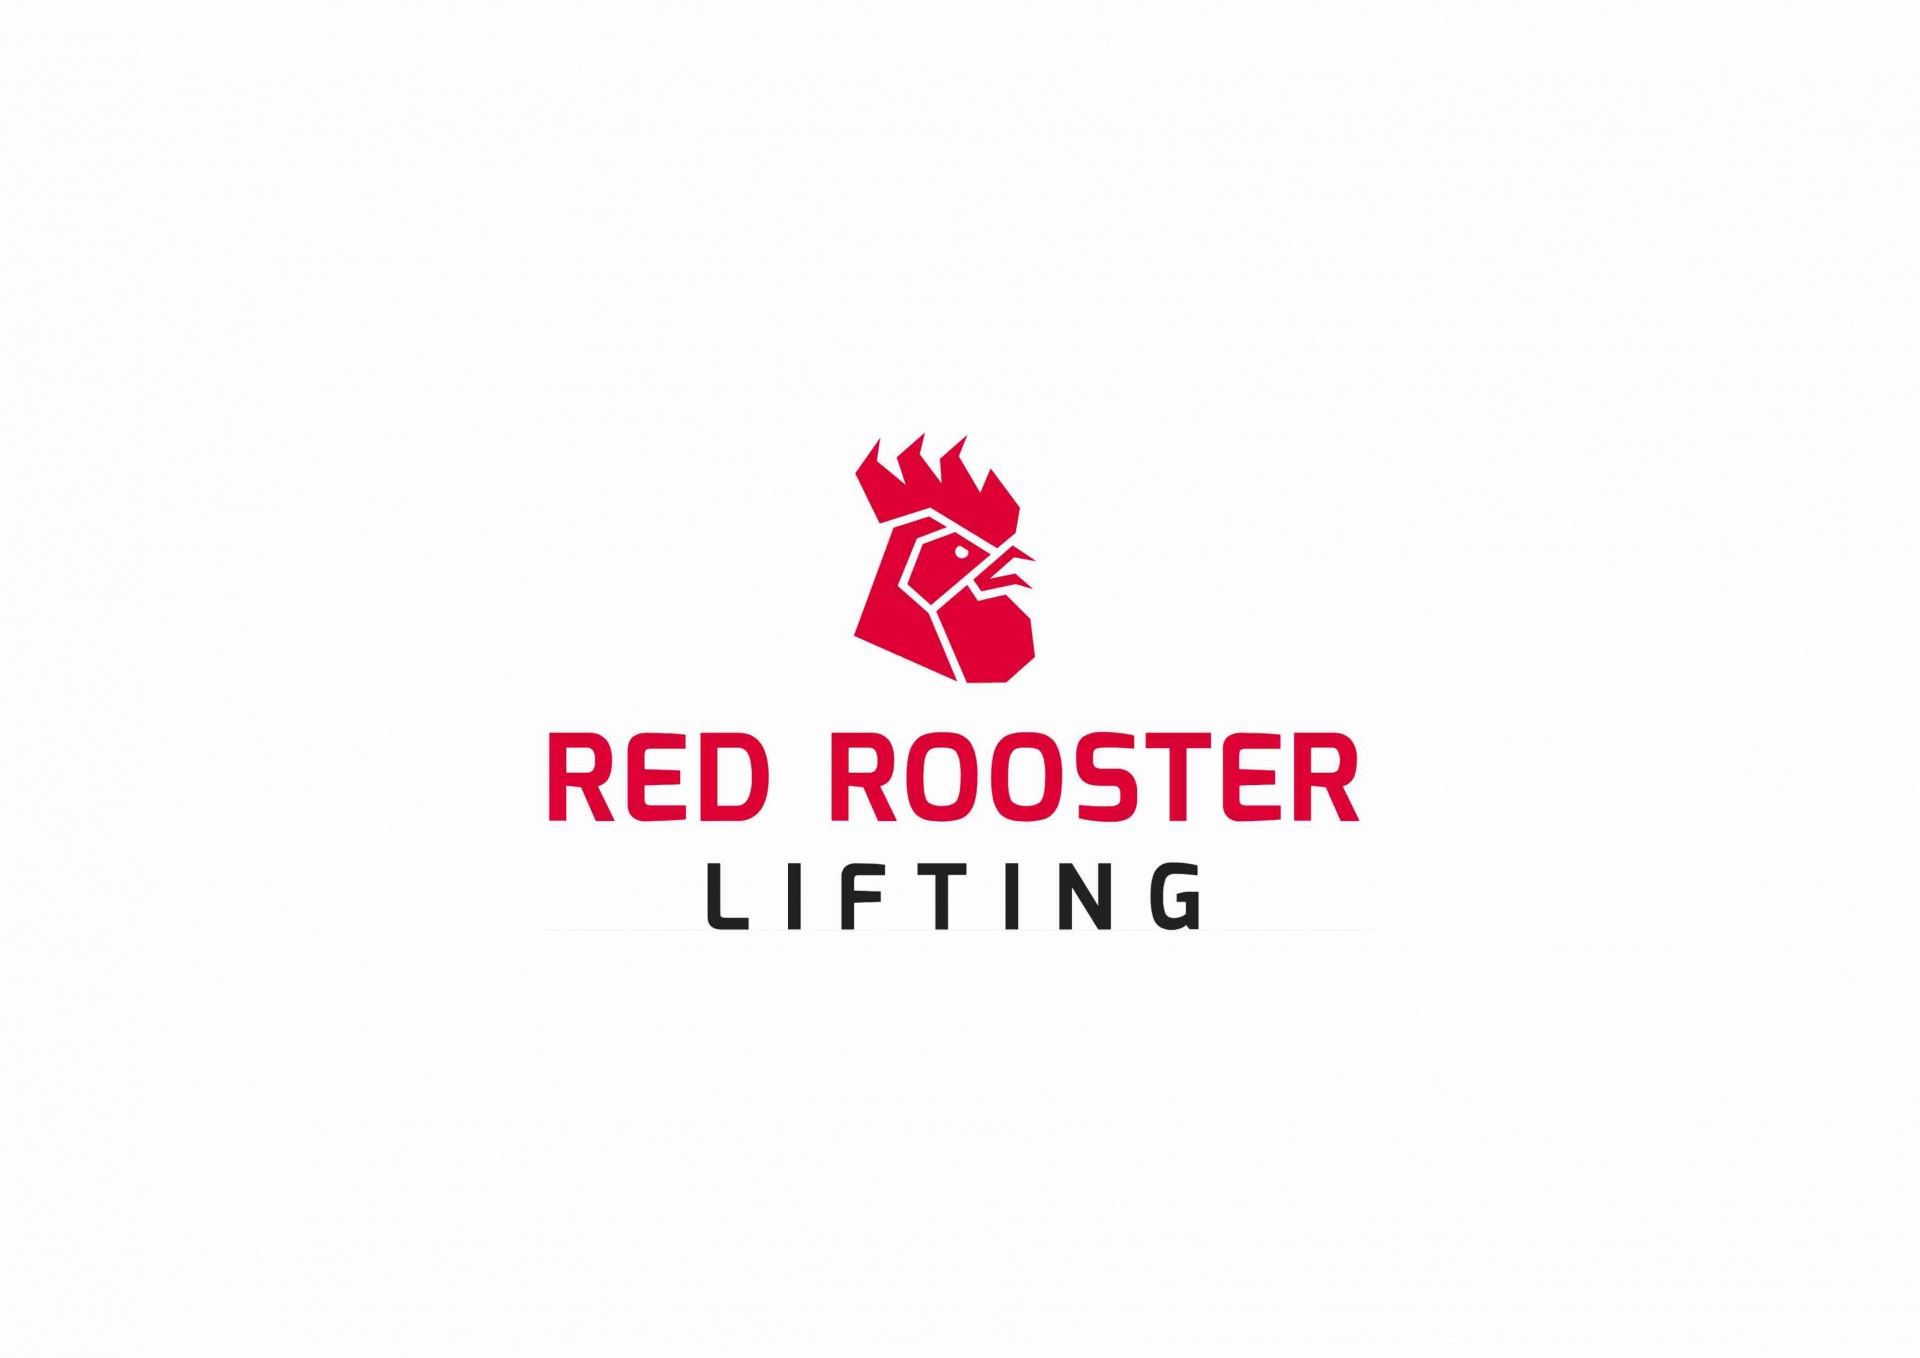 Our Partnership with "Red Rooster Lifting"!